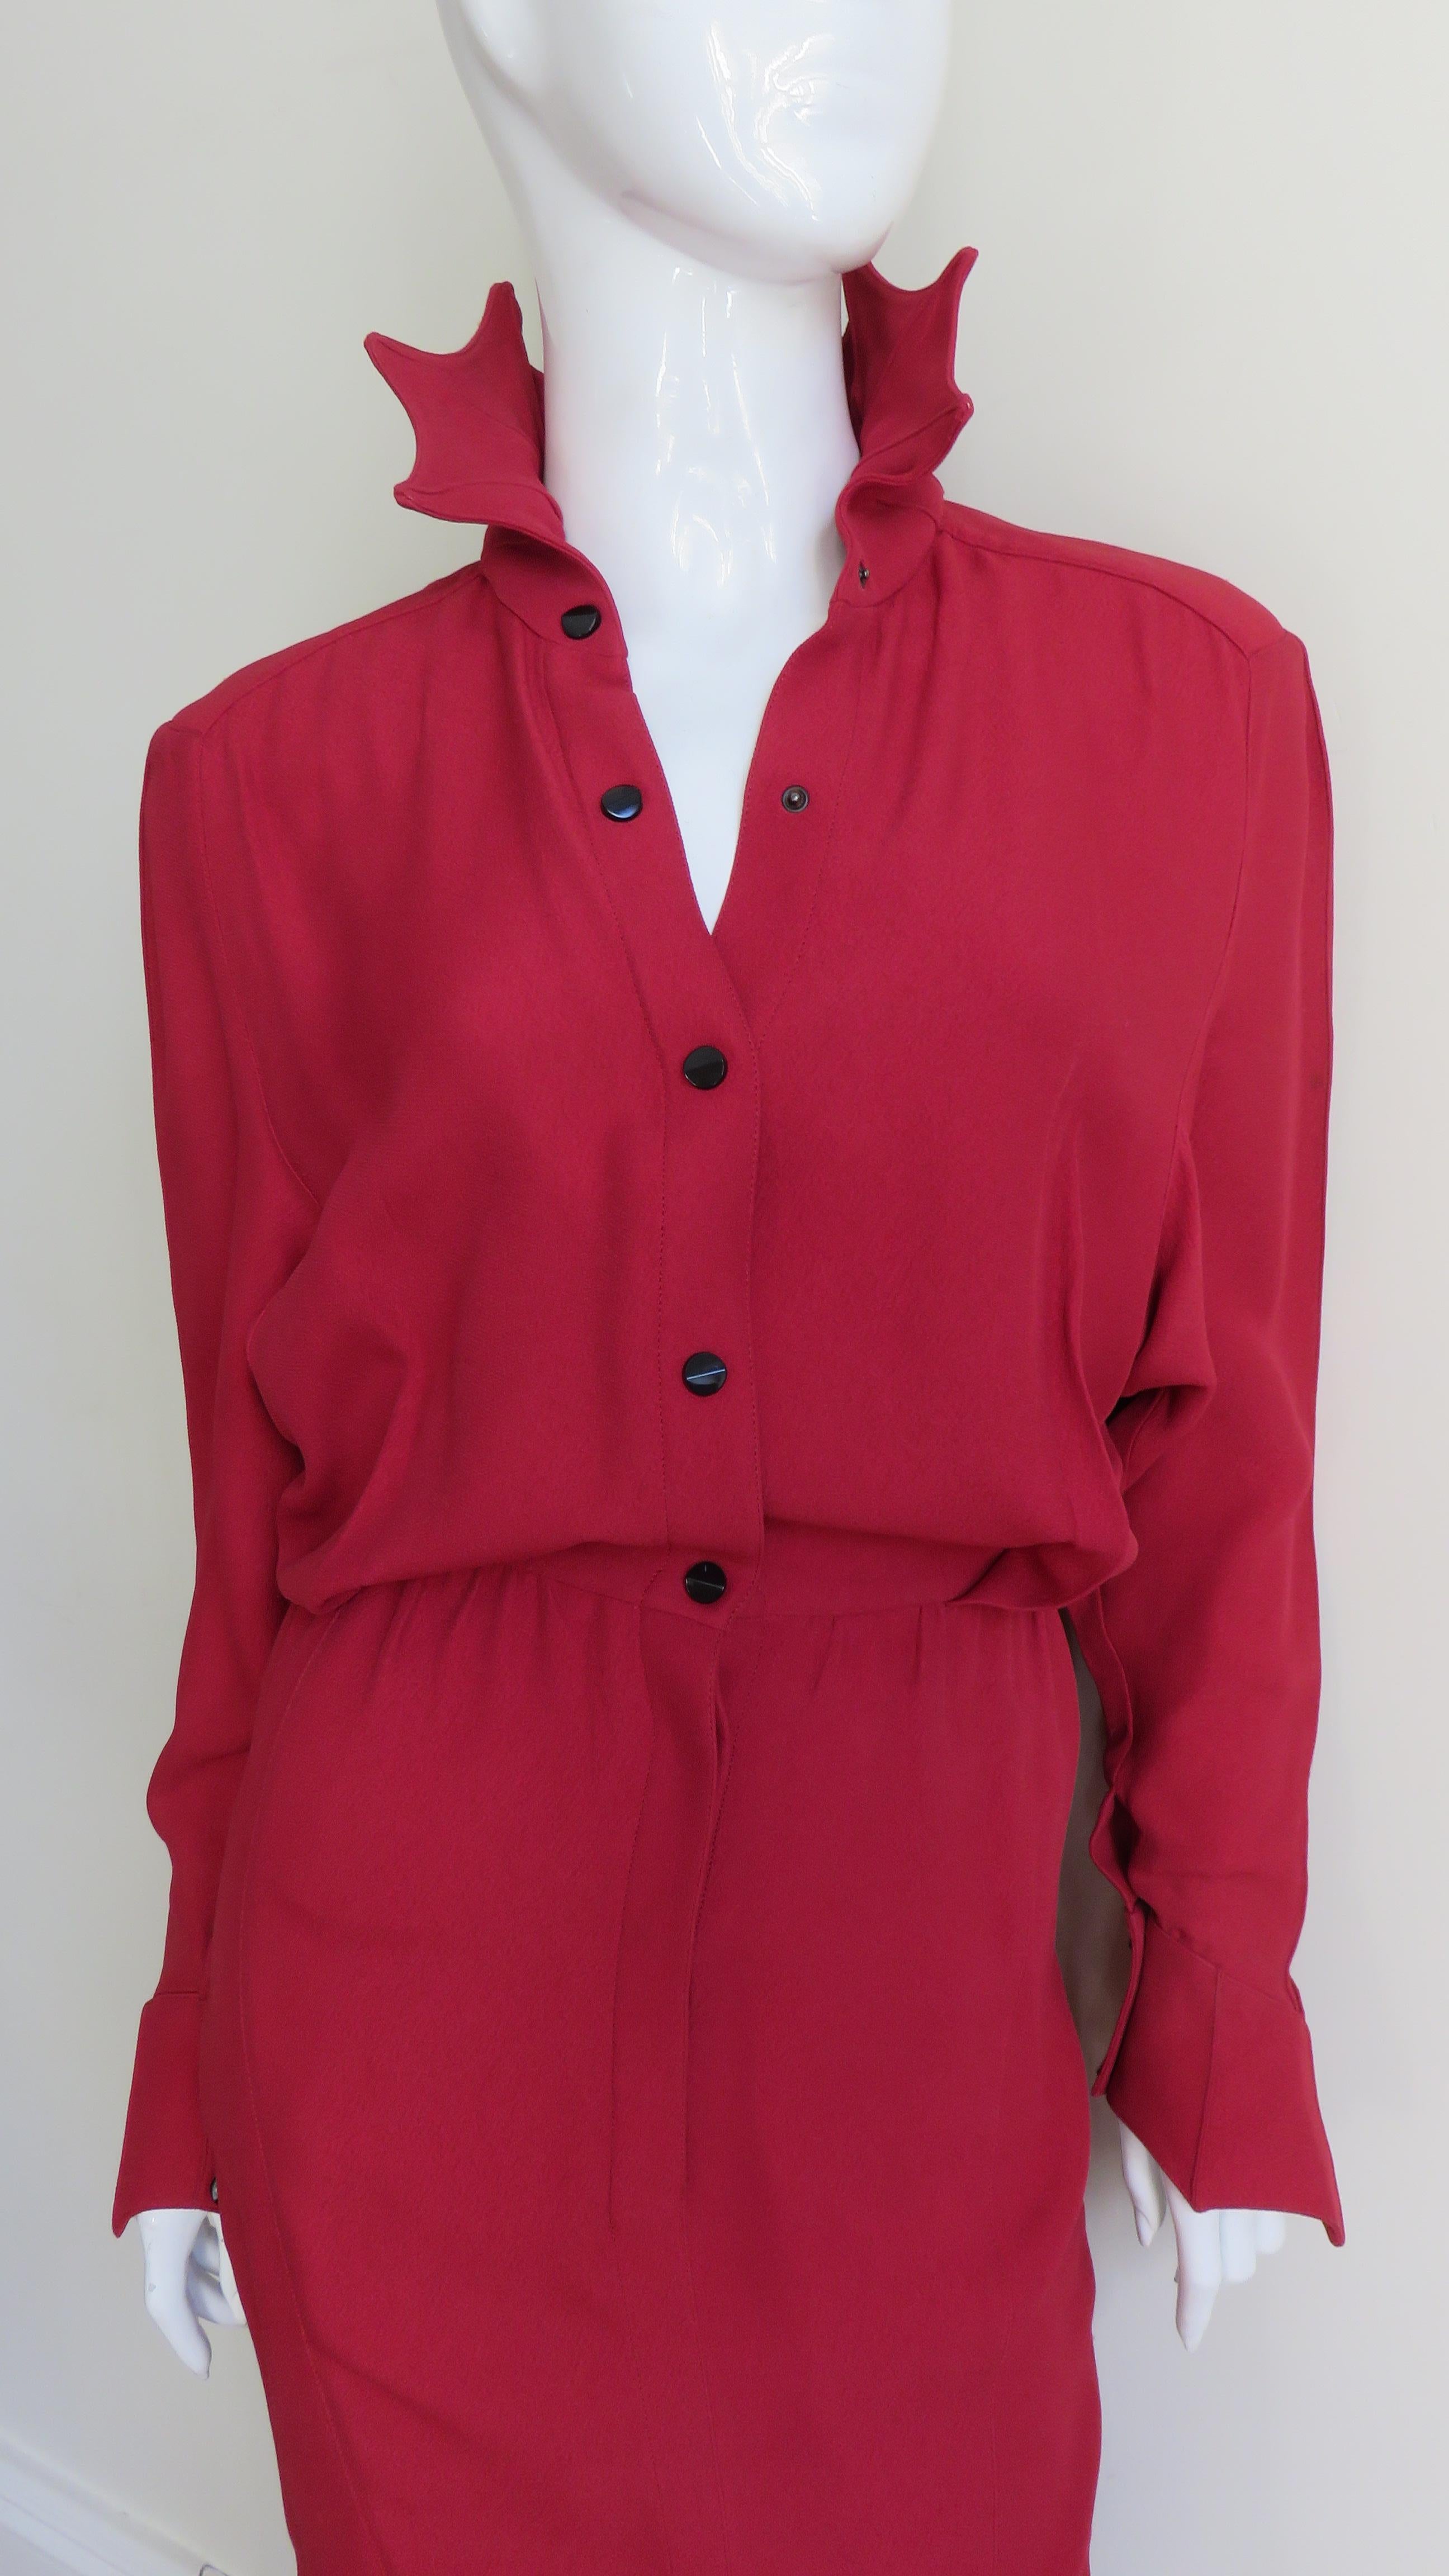 Red Thierry Mugler Dress with Pointed Collar and Cuffs 1980s For Sale